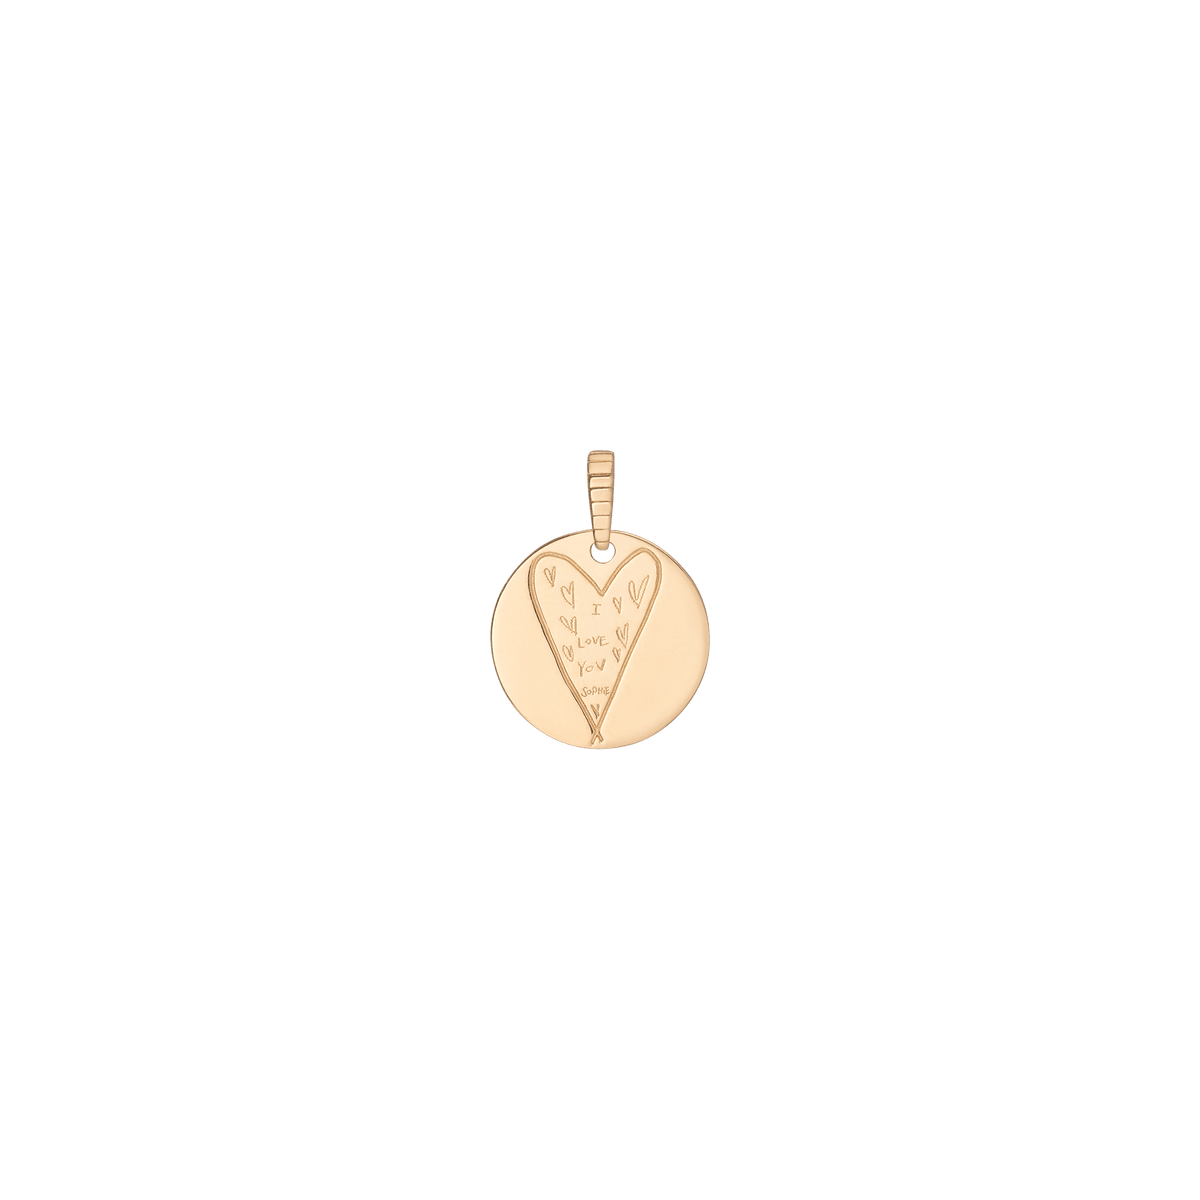 Heart of Gold Engravable Charm 10mm x 10mm / No Engraving